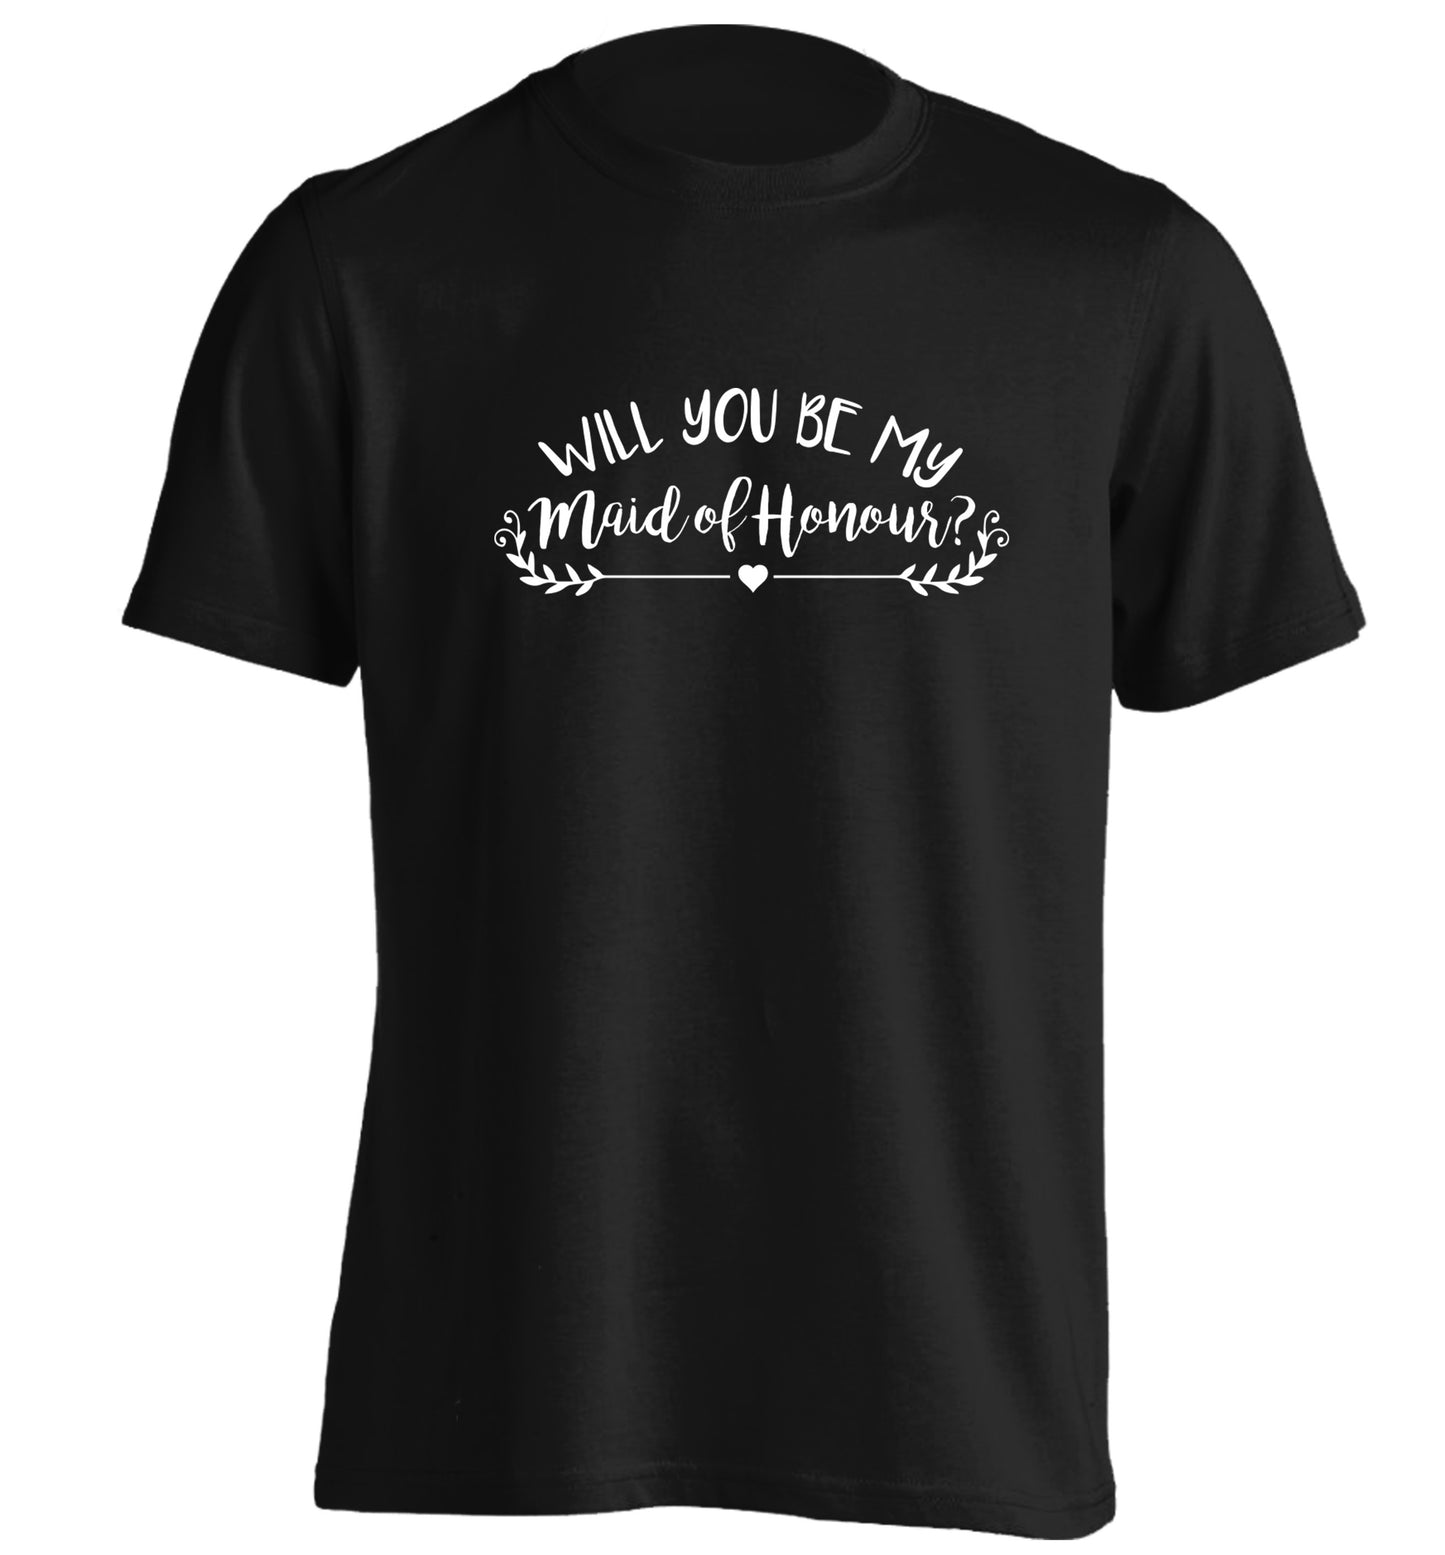 Will you be my maid of honour? adults unisex black Tshirt 2XL